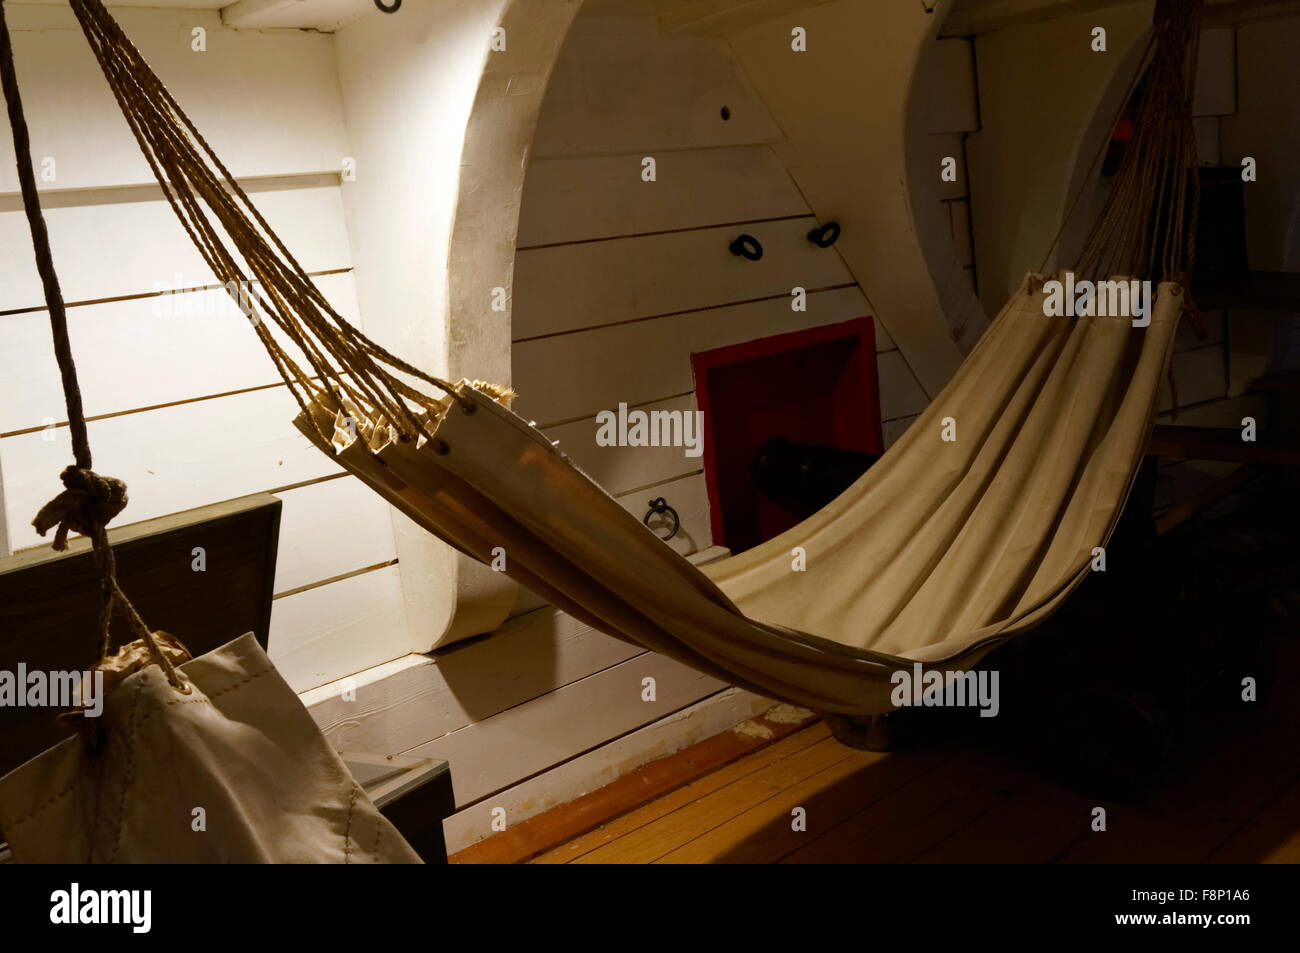 Hammock in replica of the fo'c'sle or forecastle of Captain George Vancouver's ship Discovery, Vancouver Maritime Museum, Vancou Stock Photo